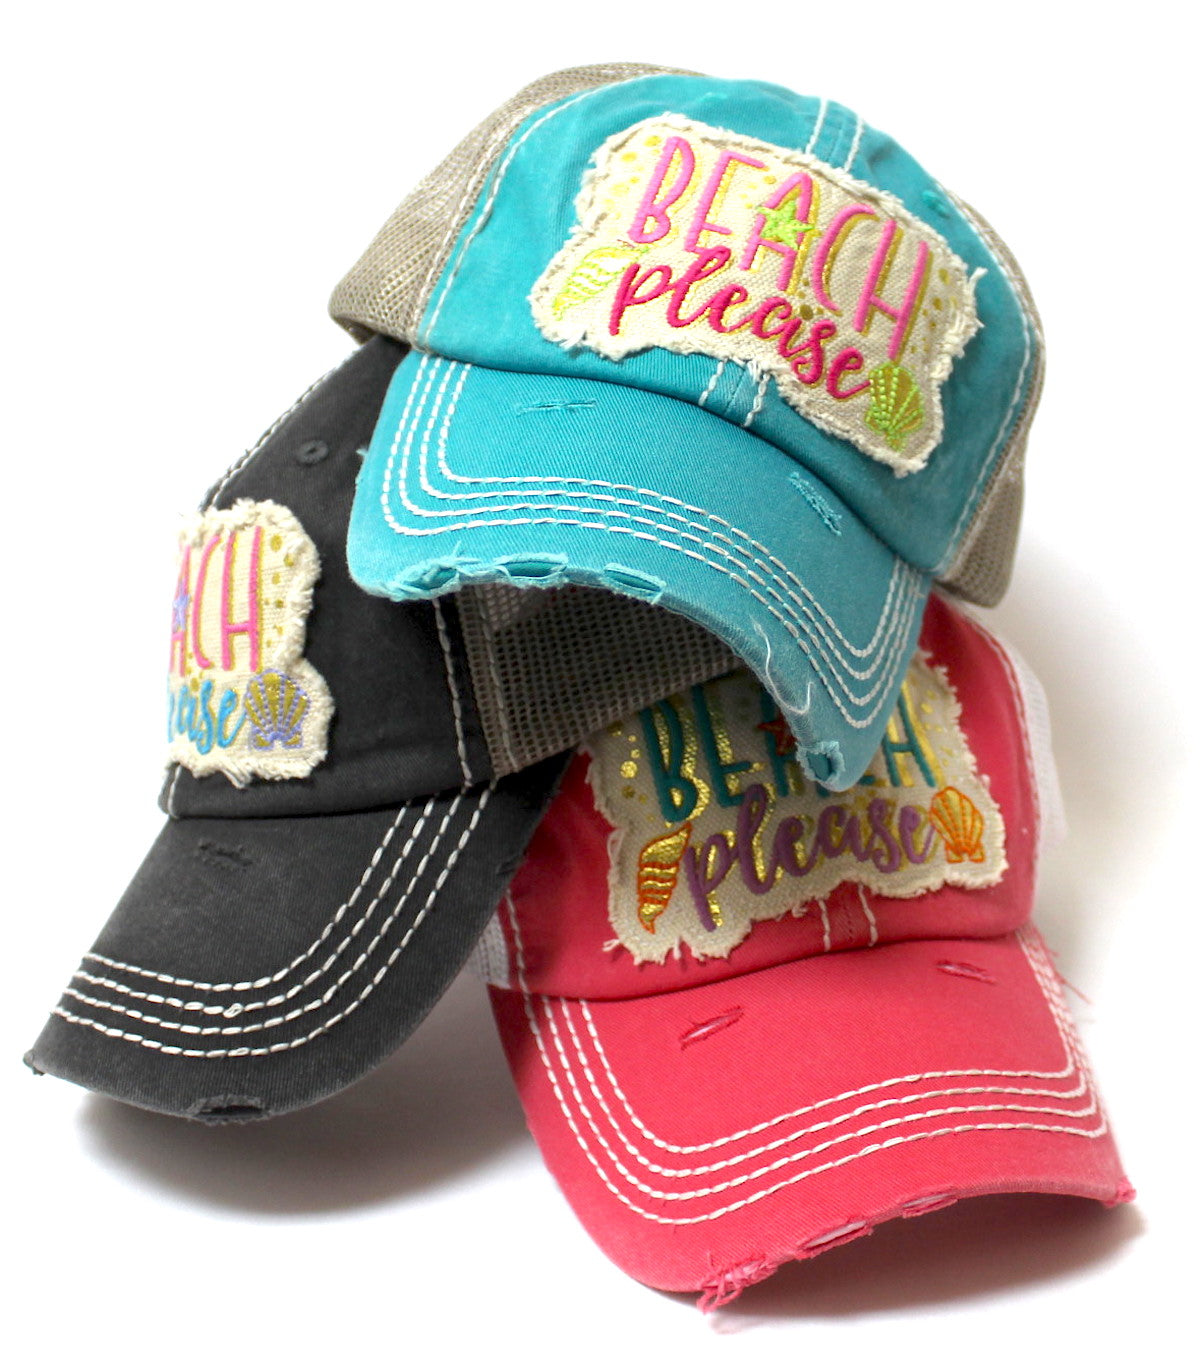 Women's Vintage Trucker Hat Beach Please Patch Embroidery Graphic, Coral Rose - Caps 'N Vintage 